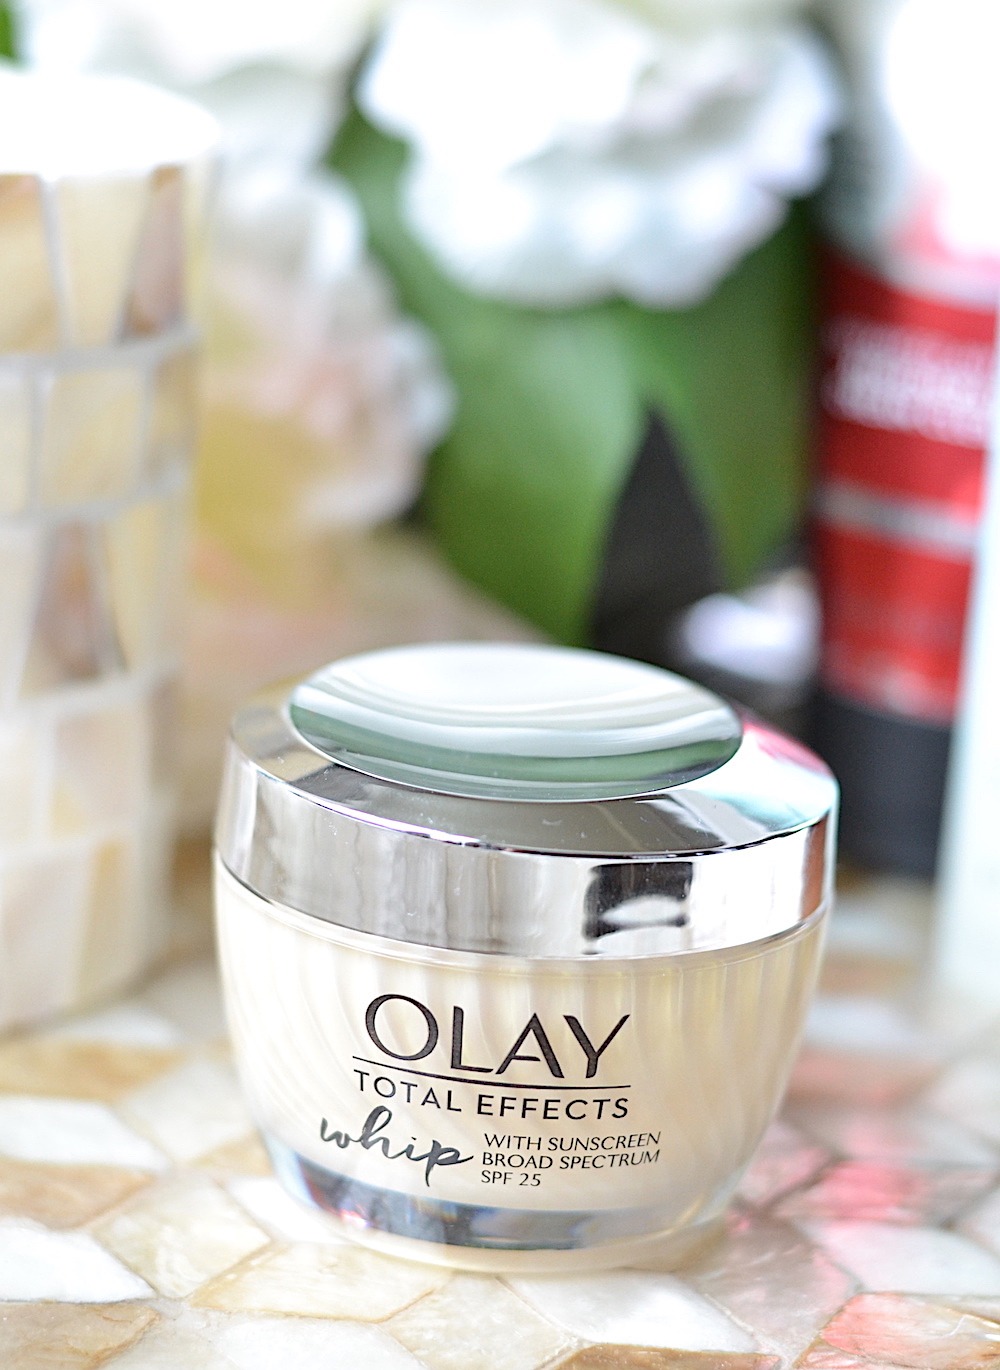  A shine-free moisturizer that also doubles as a primer? Yes, please! Olay Total Effects Whip Face Moisturizer SPF 25